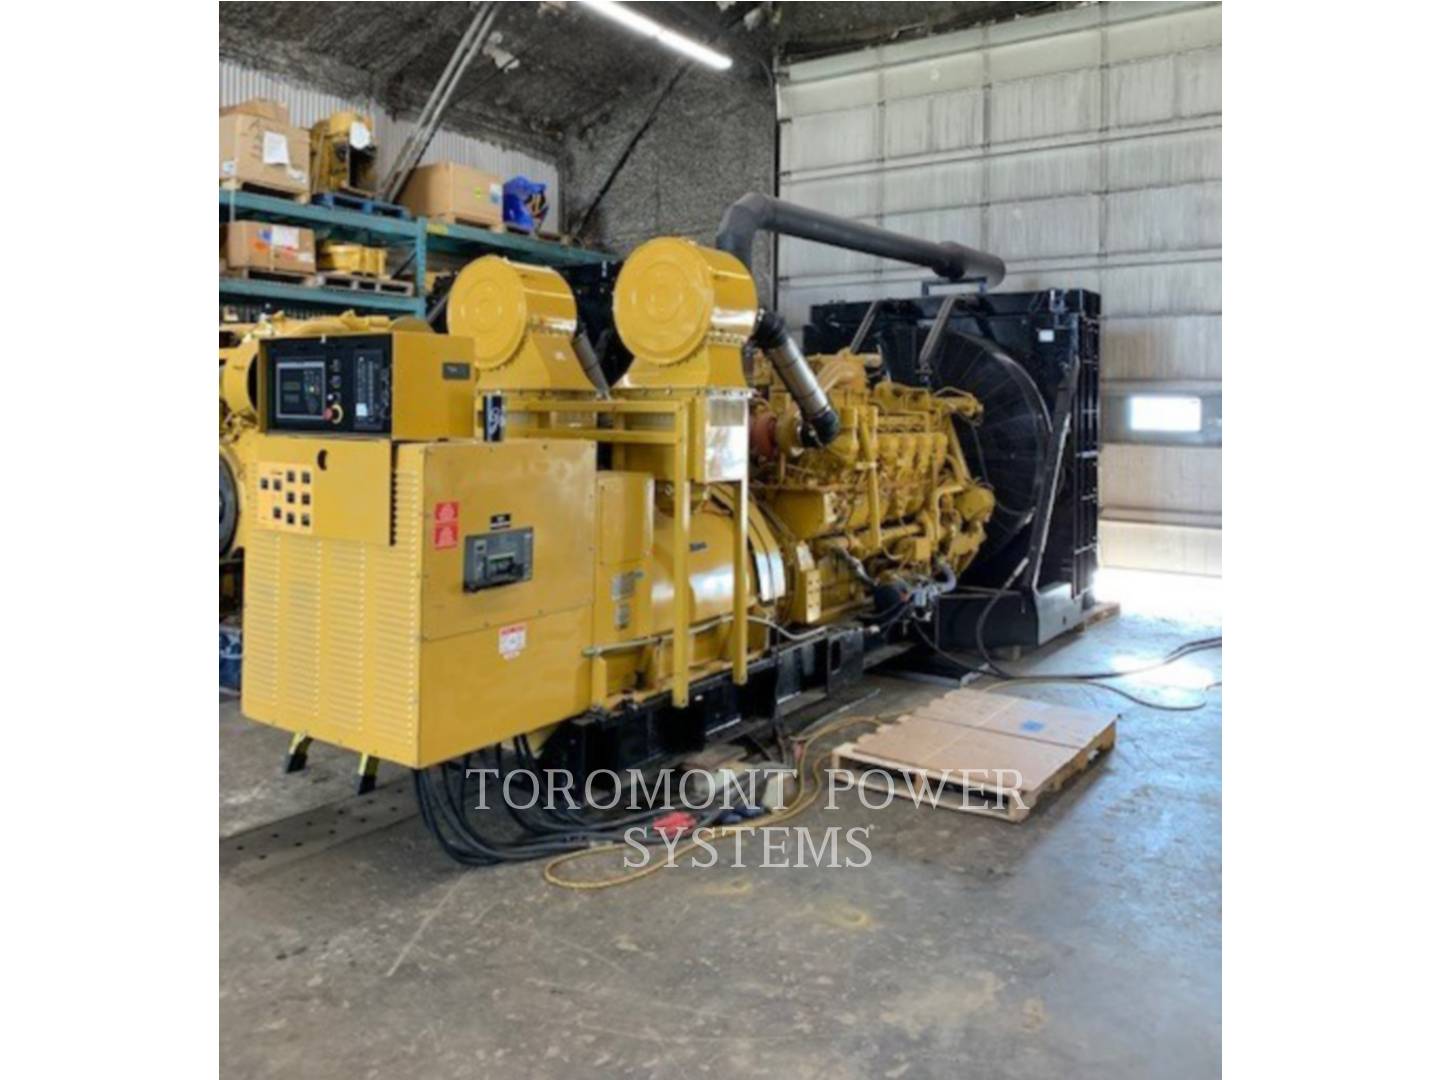 Used Genset Cat Powersystems